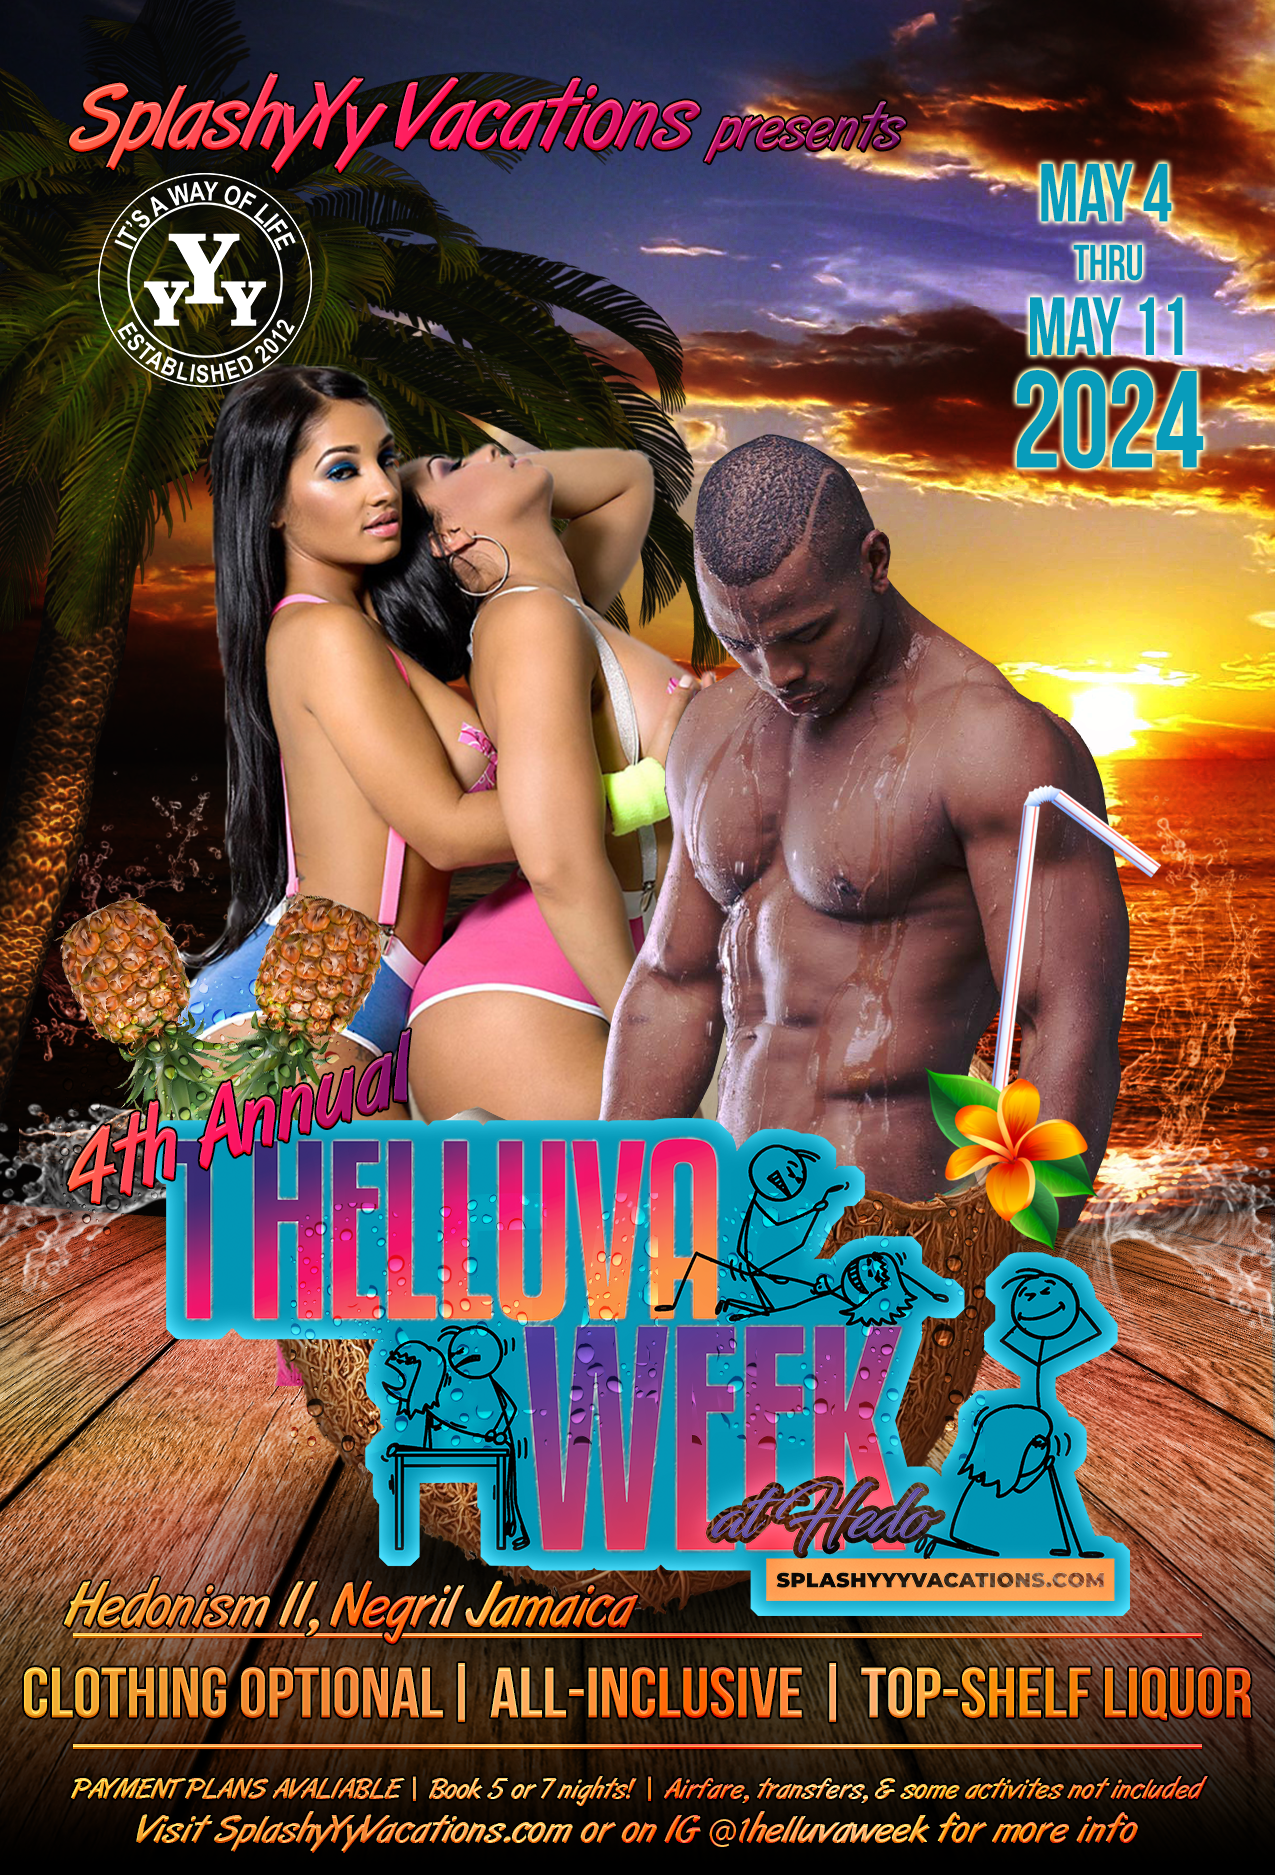 Group Event - 1 Helluva Week at Hedo - May 4 - 11, 2024 - Hedonism II Resort, Negril Jamaica